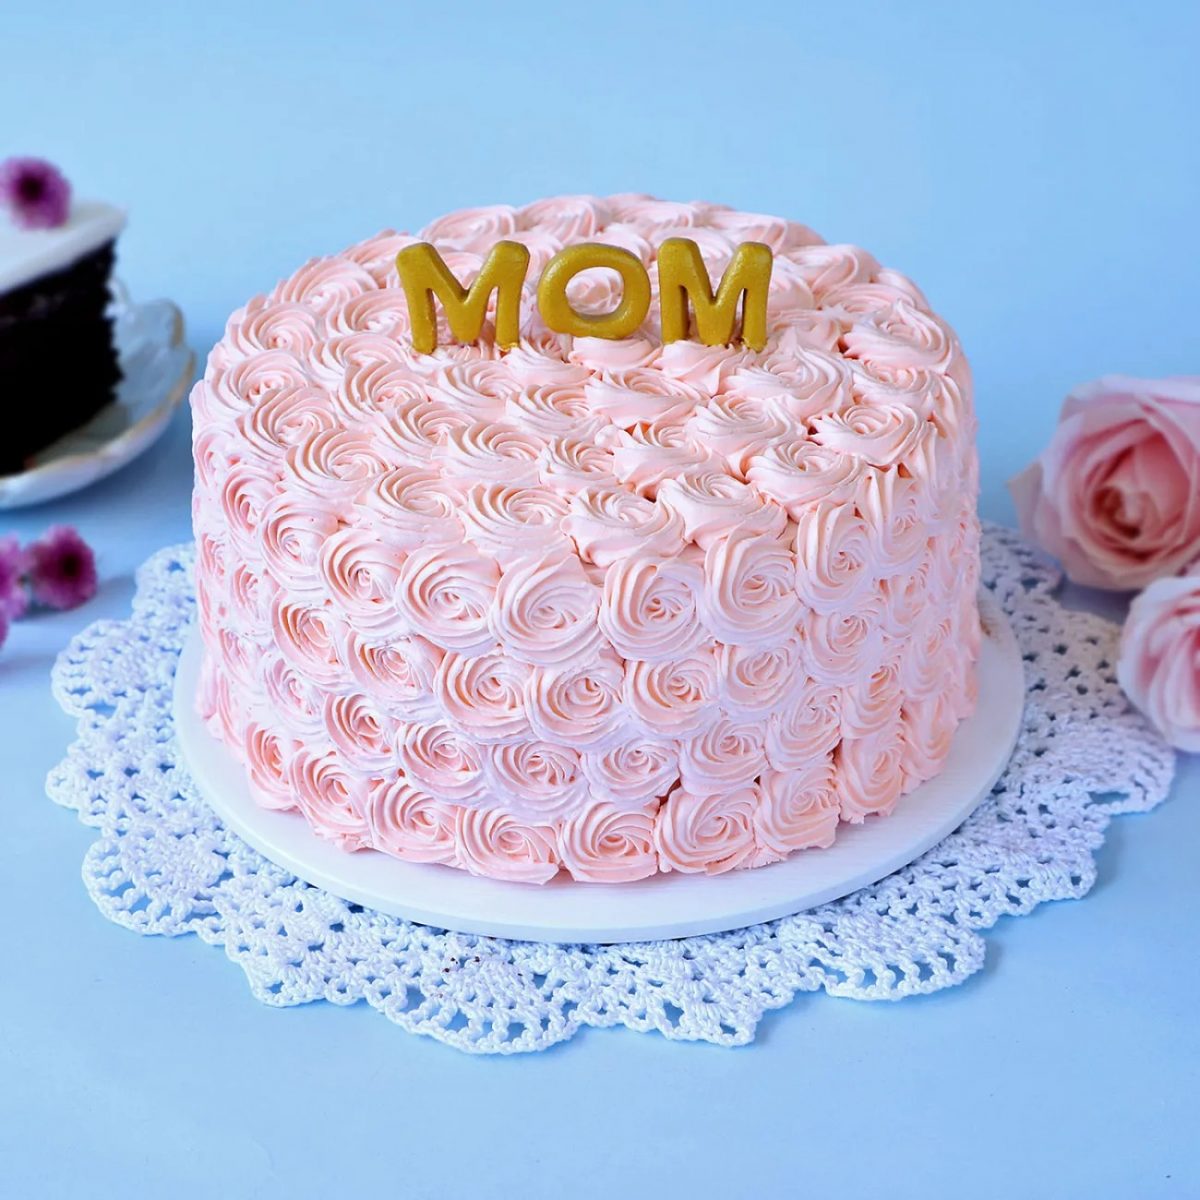 Send Mothers Day Cakes to Nepal